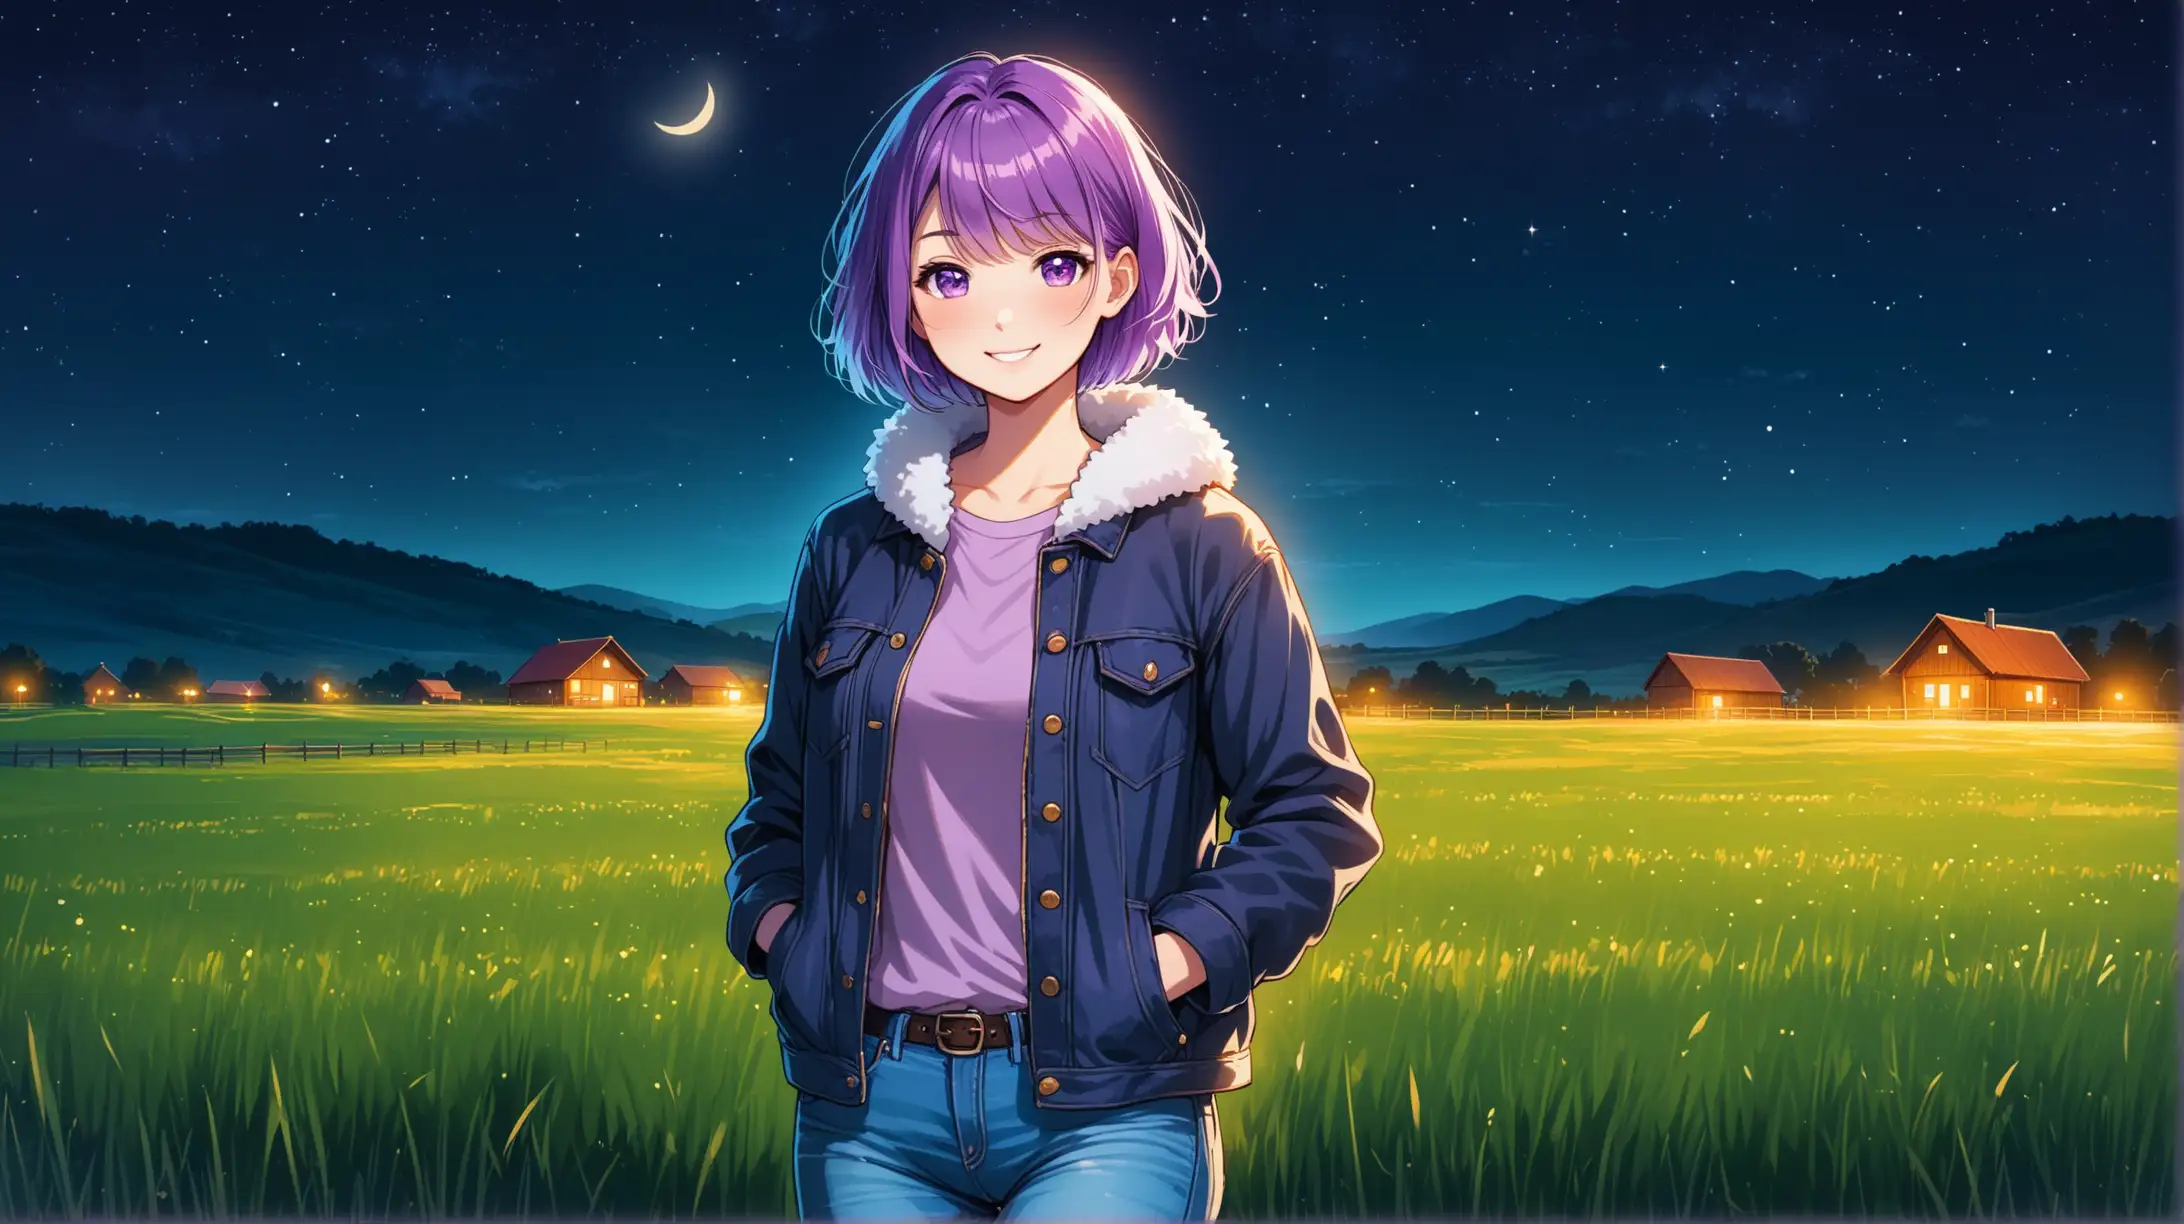 Serene Nighttime Countryside Scene with a Smiling Young Woman in Casual Attire